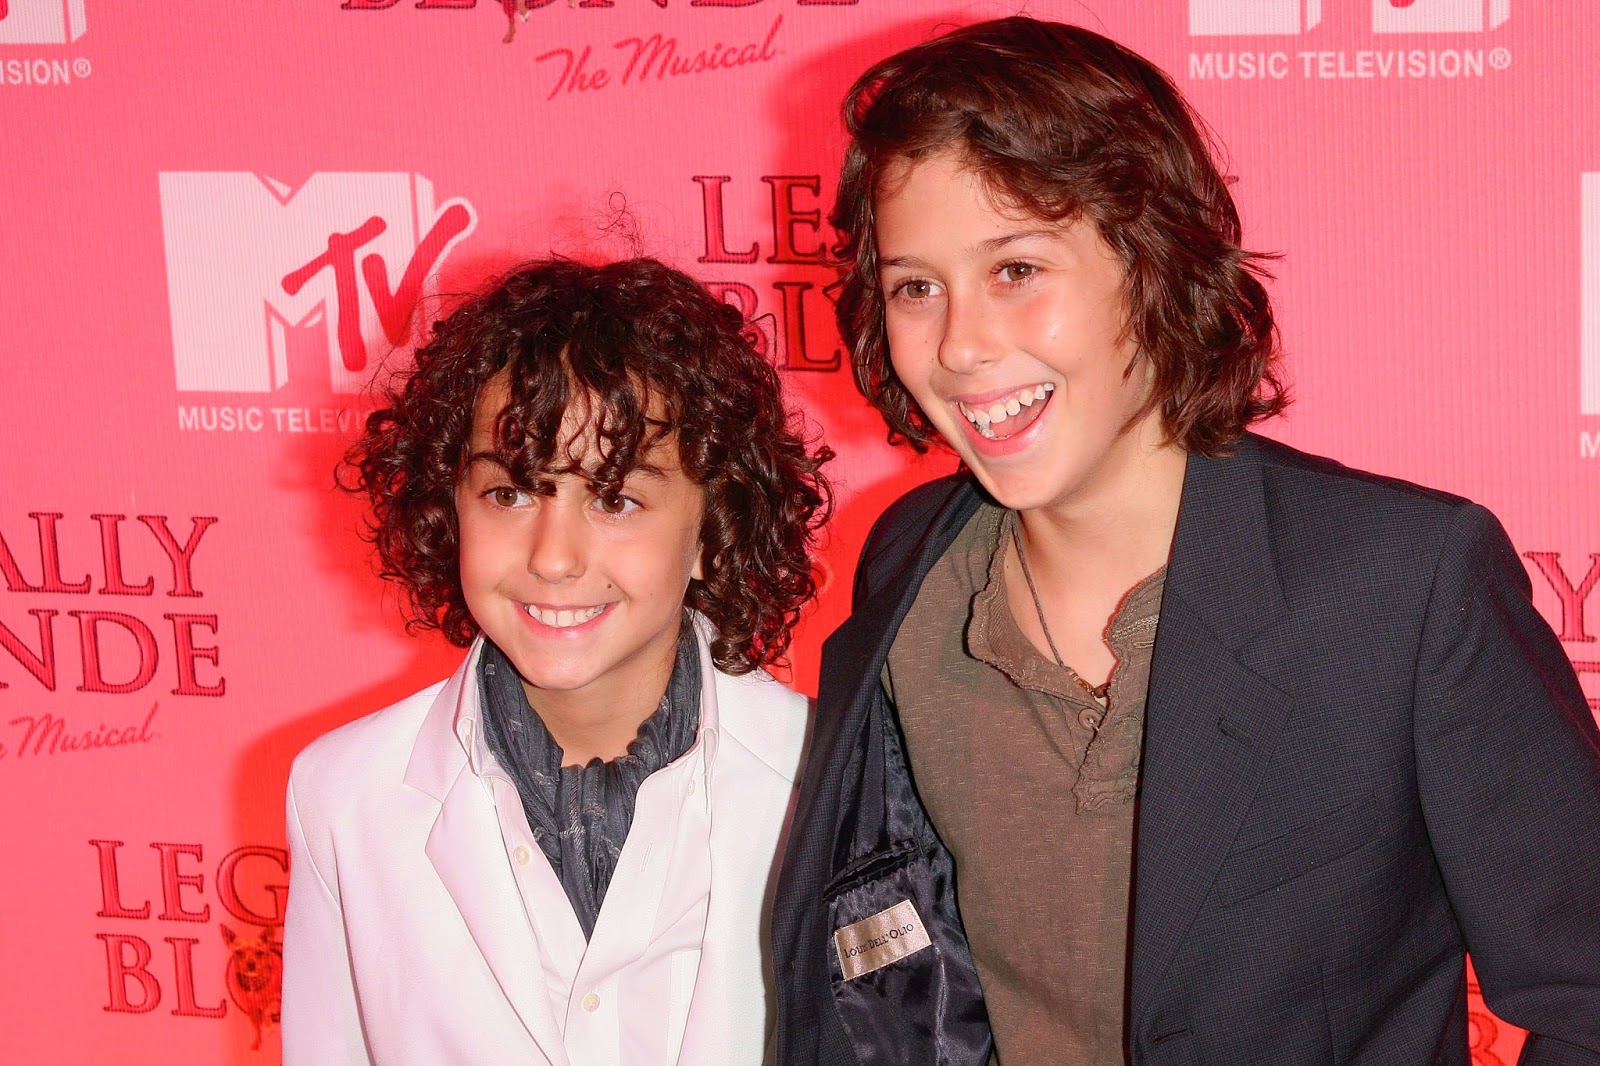 The Stars Of 'Naked Brothers Band' Are Planning A Reunion In 2018...